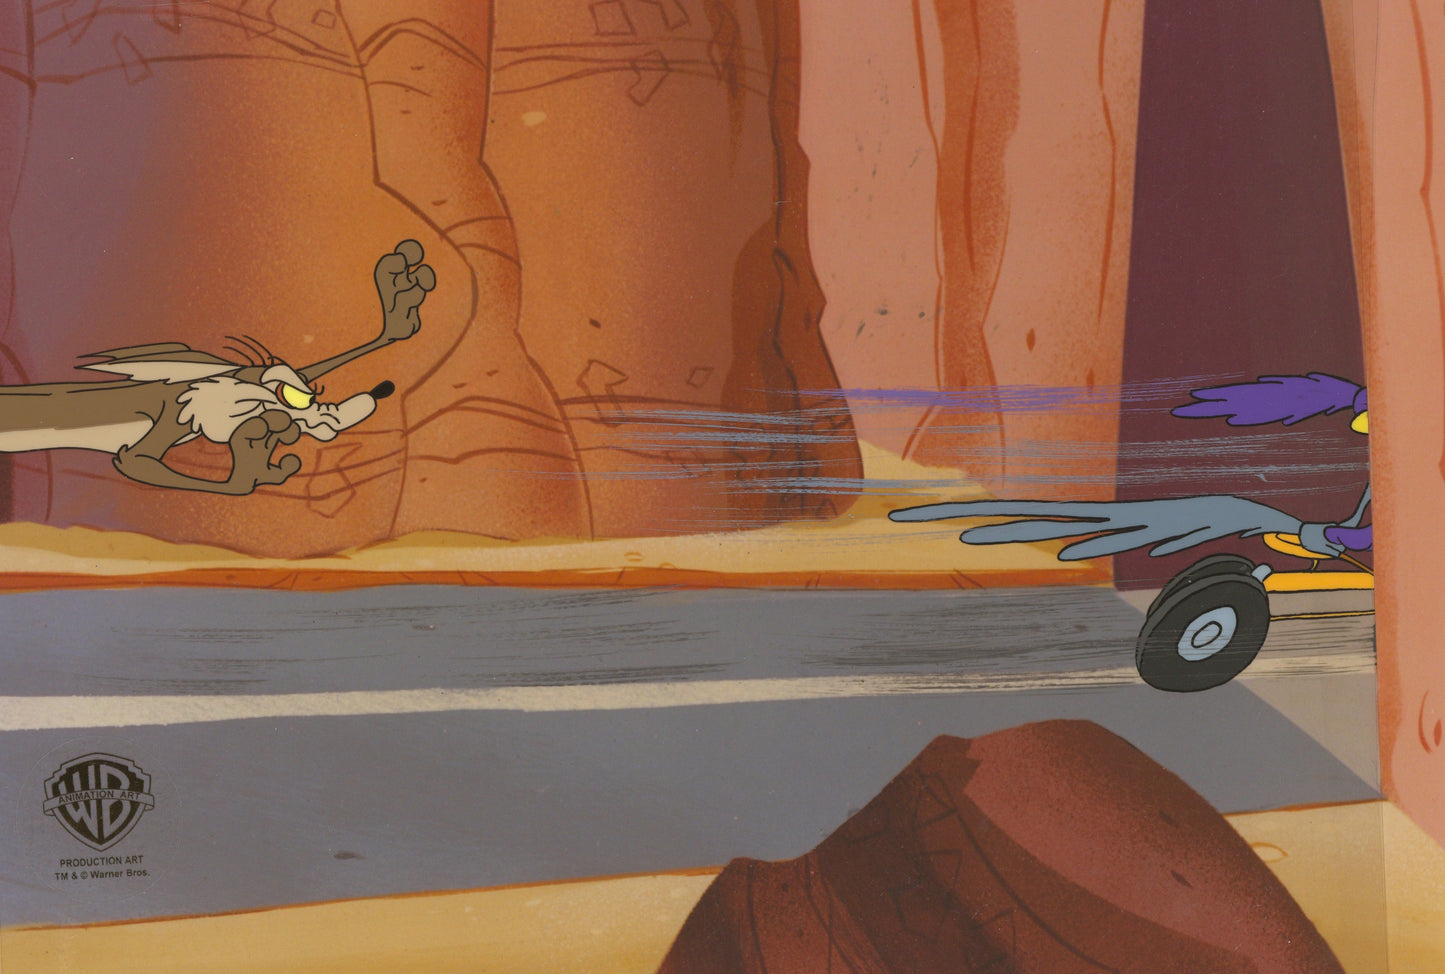 Looney Tunes Original Production Cel: Wile E. Coyote and Roadrunner